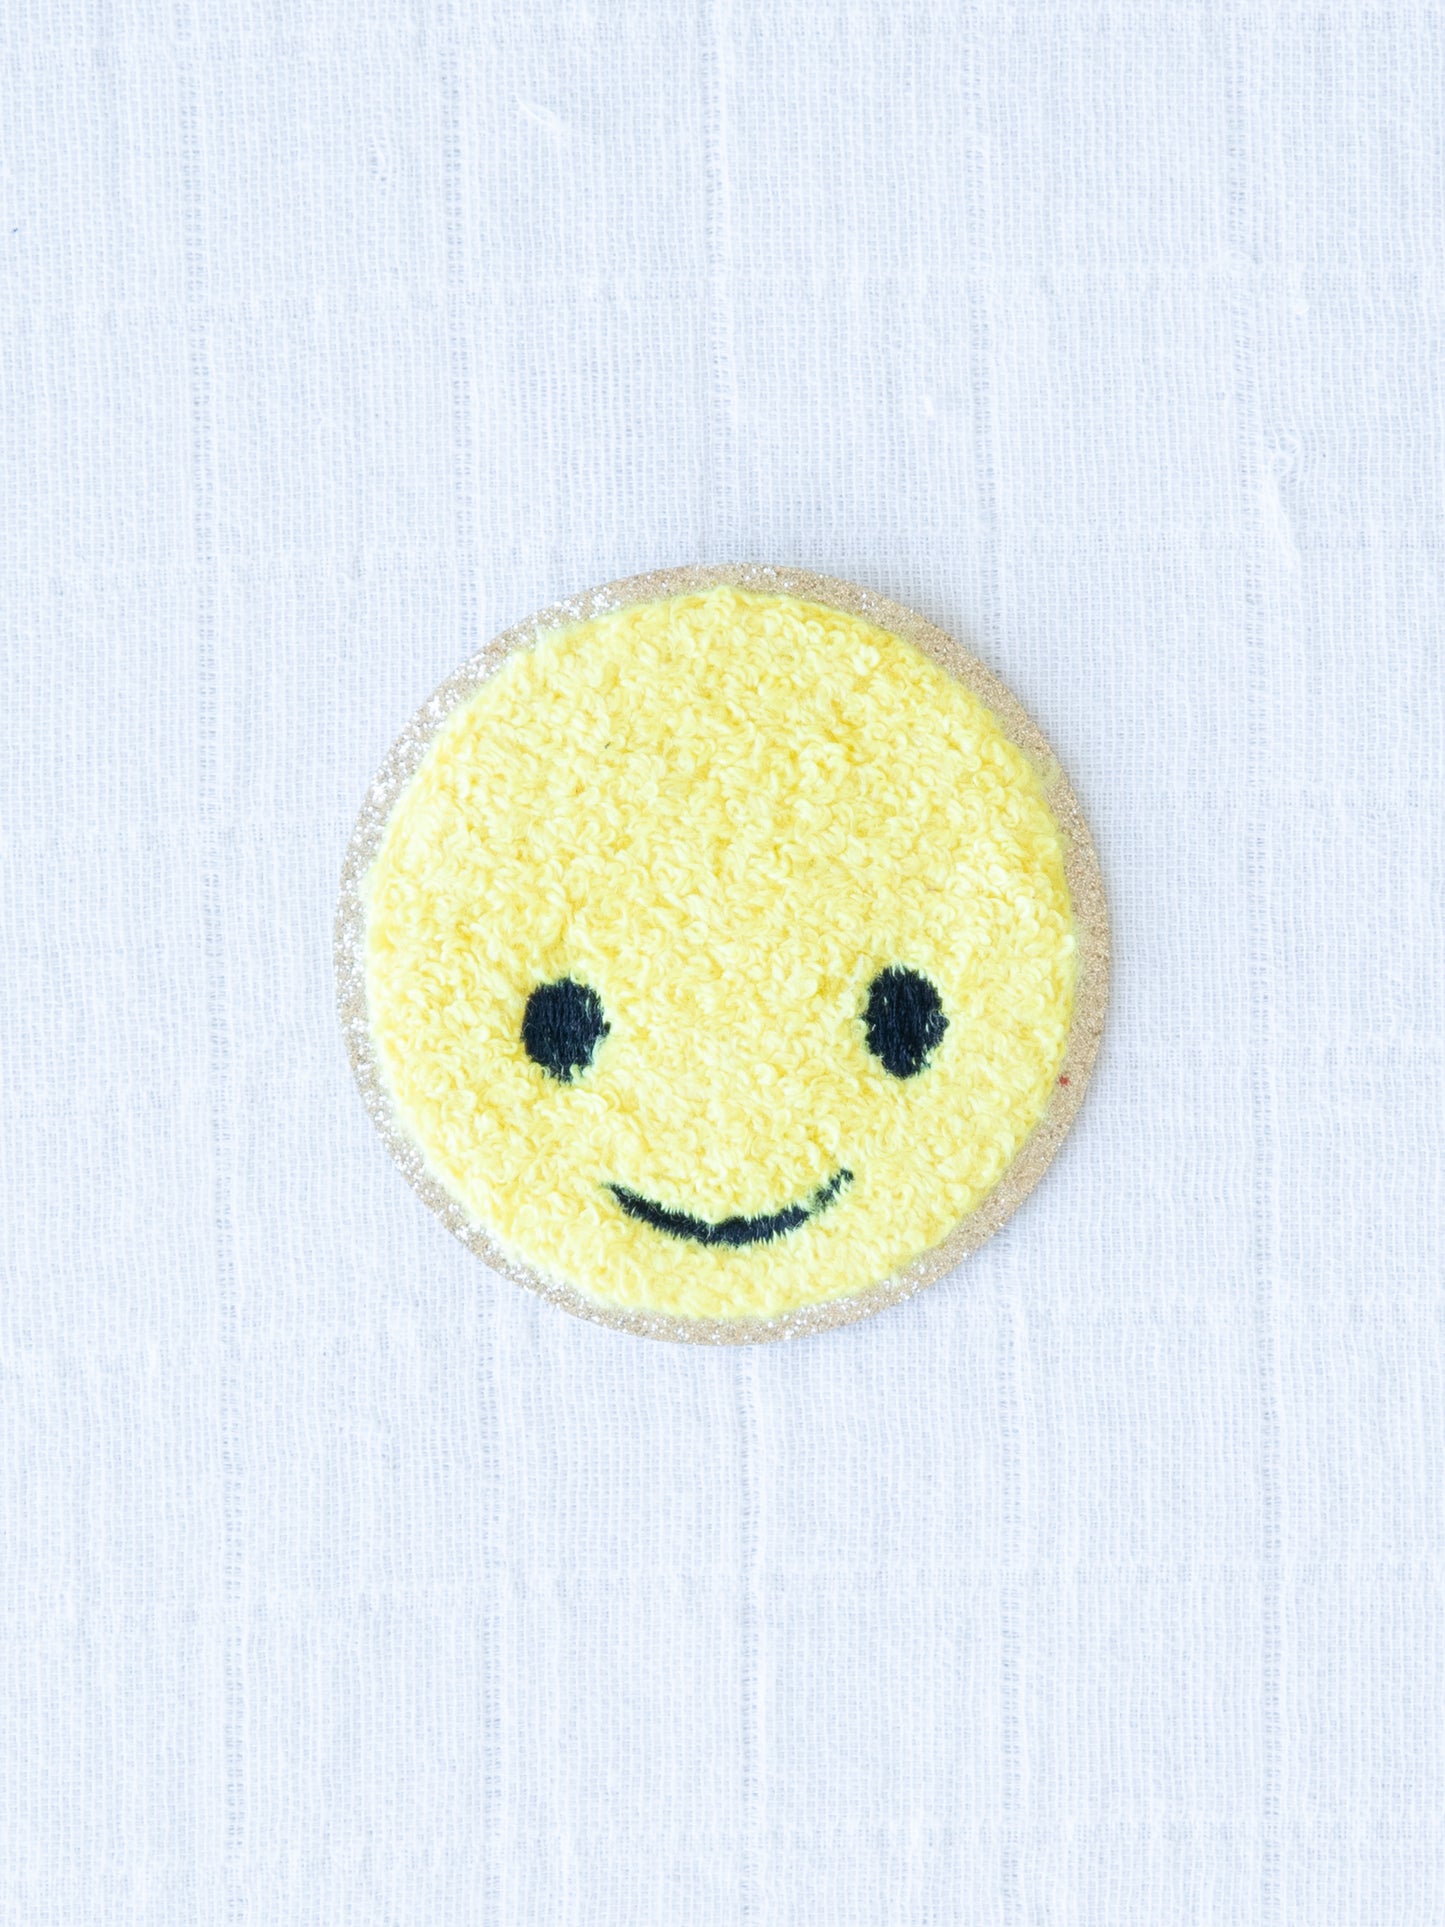 Happy Patch - Yellow Smiley Face